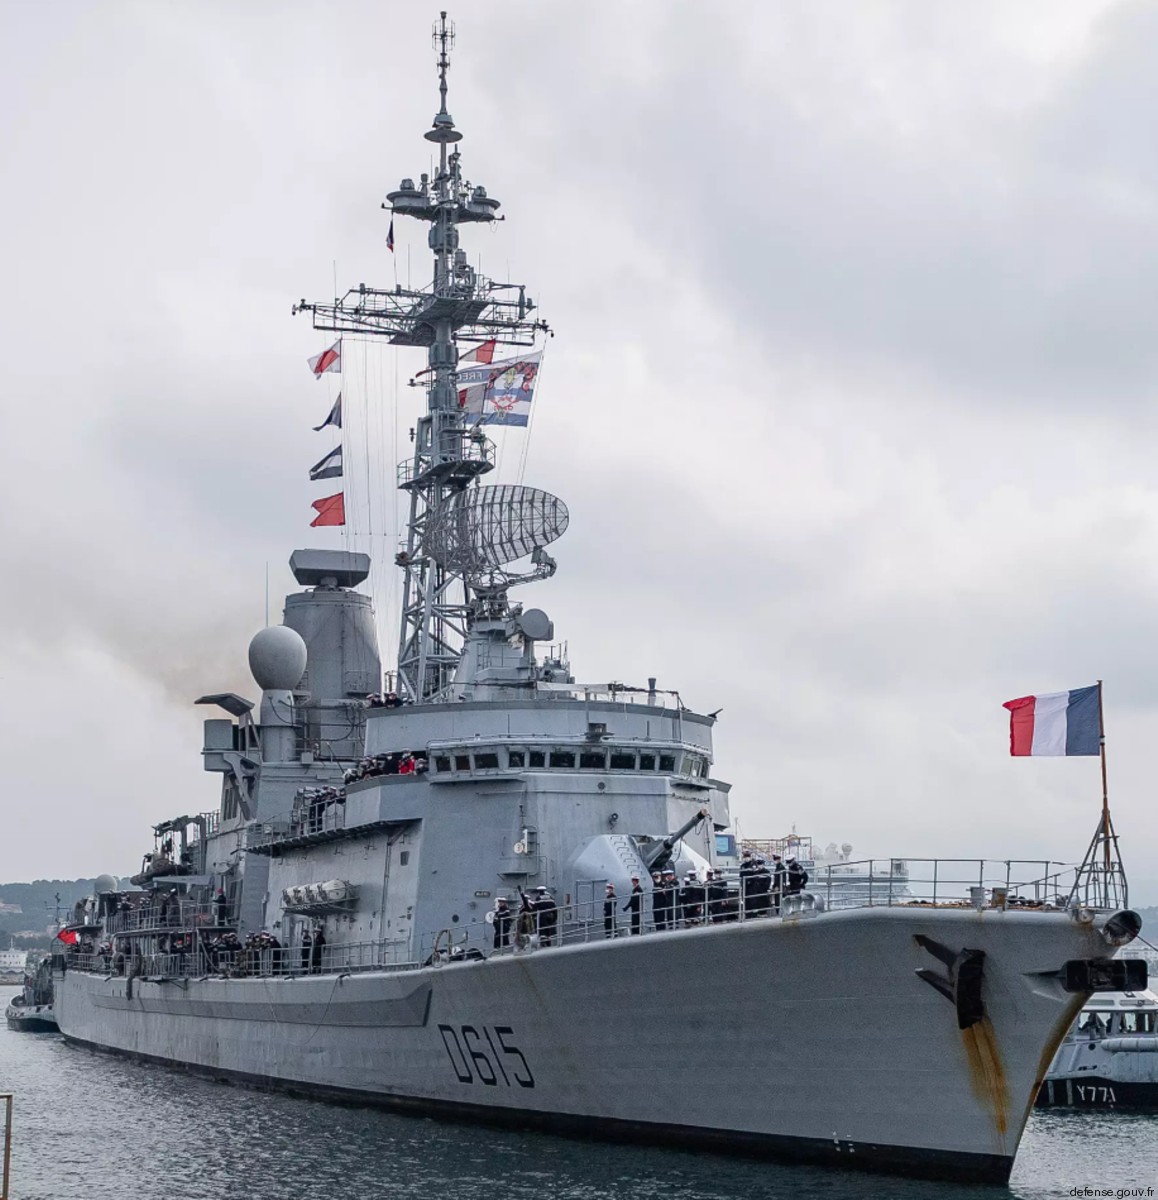 d-615 fs jean bart cassard f70aa class guided missile frigate ffgh ddg french navy marine nationale 32